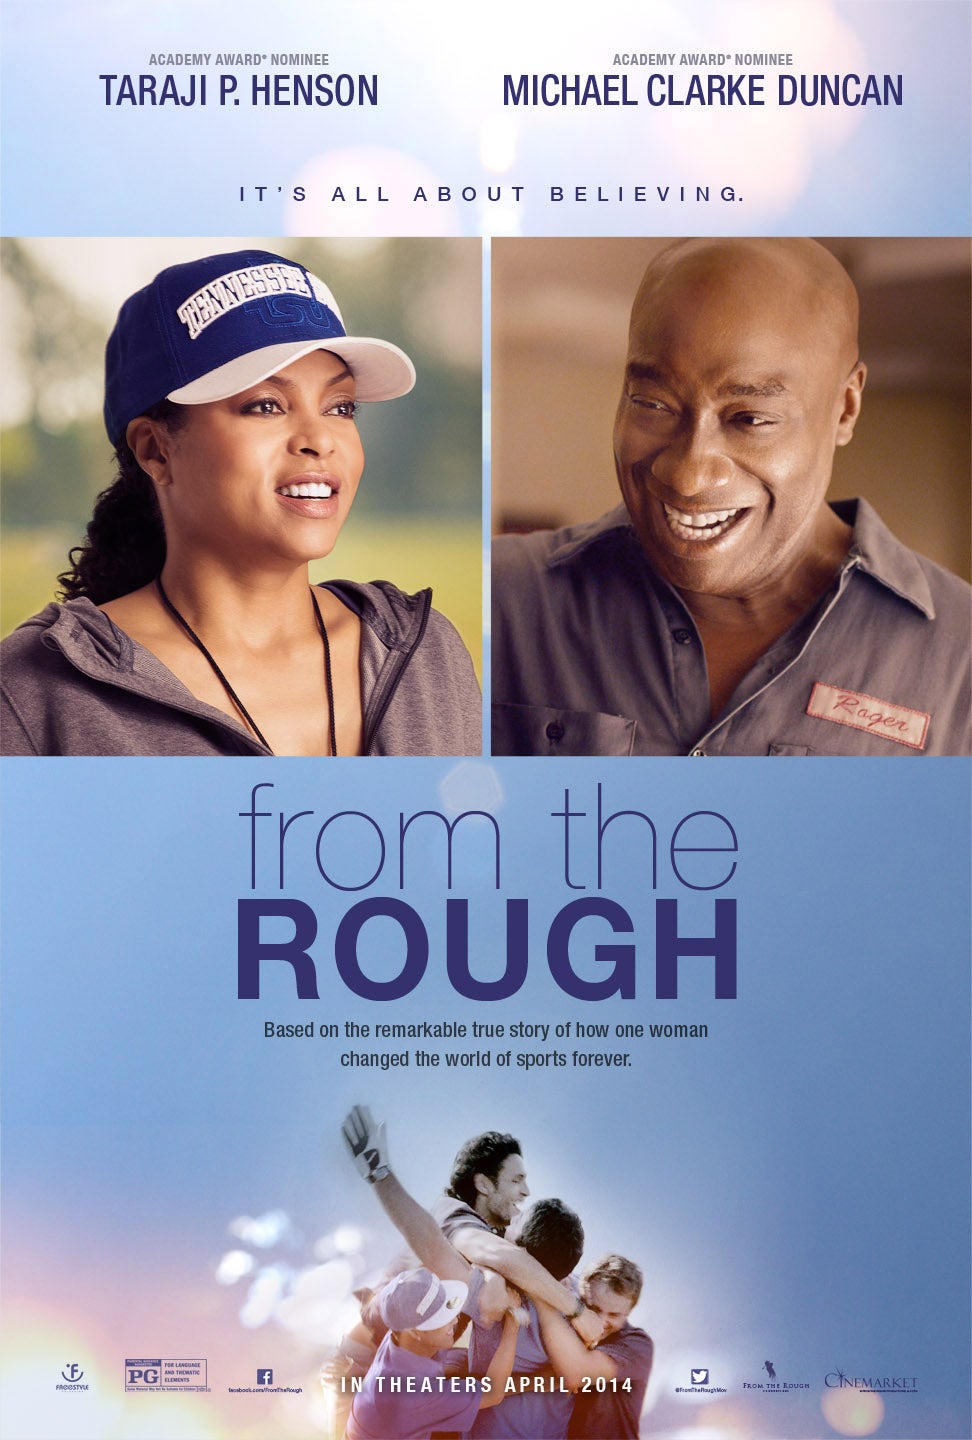 Poster Reveal: See Taraji P. Henson in 'From the Rough'